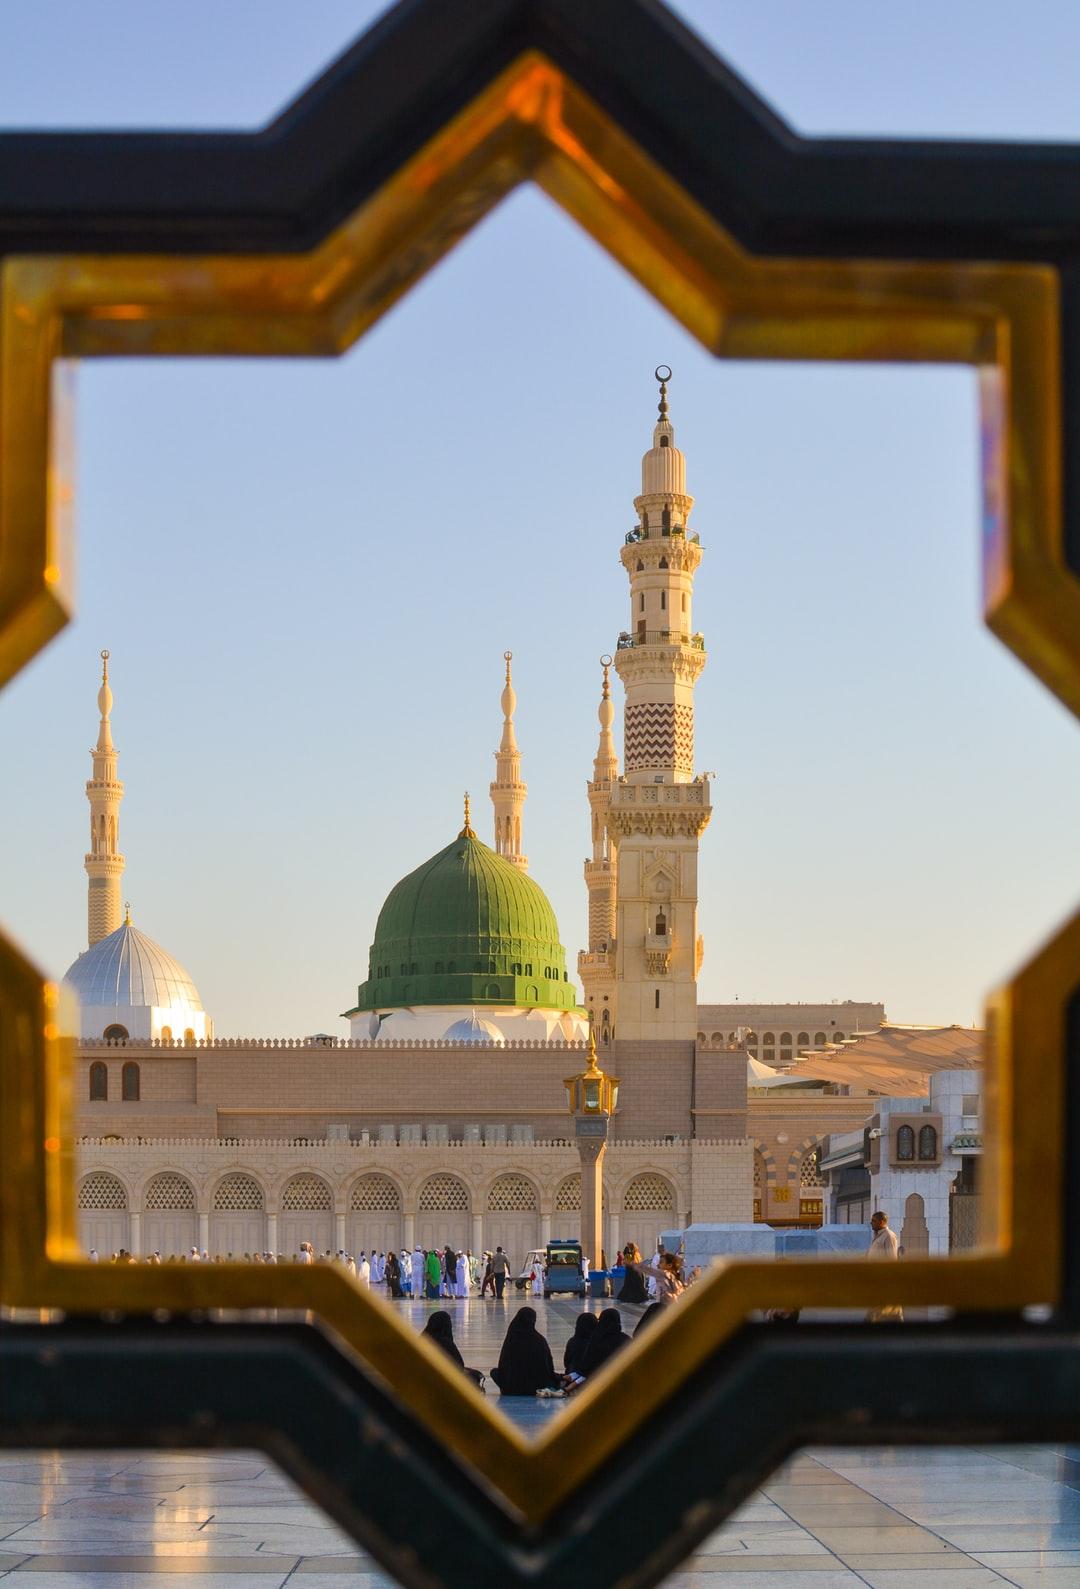 Masjid Nabawi Picture. Download Free Image